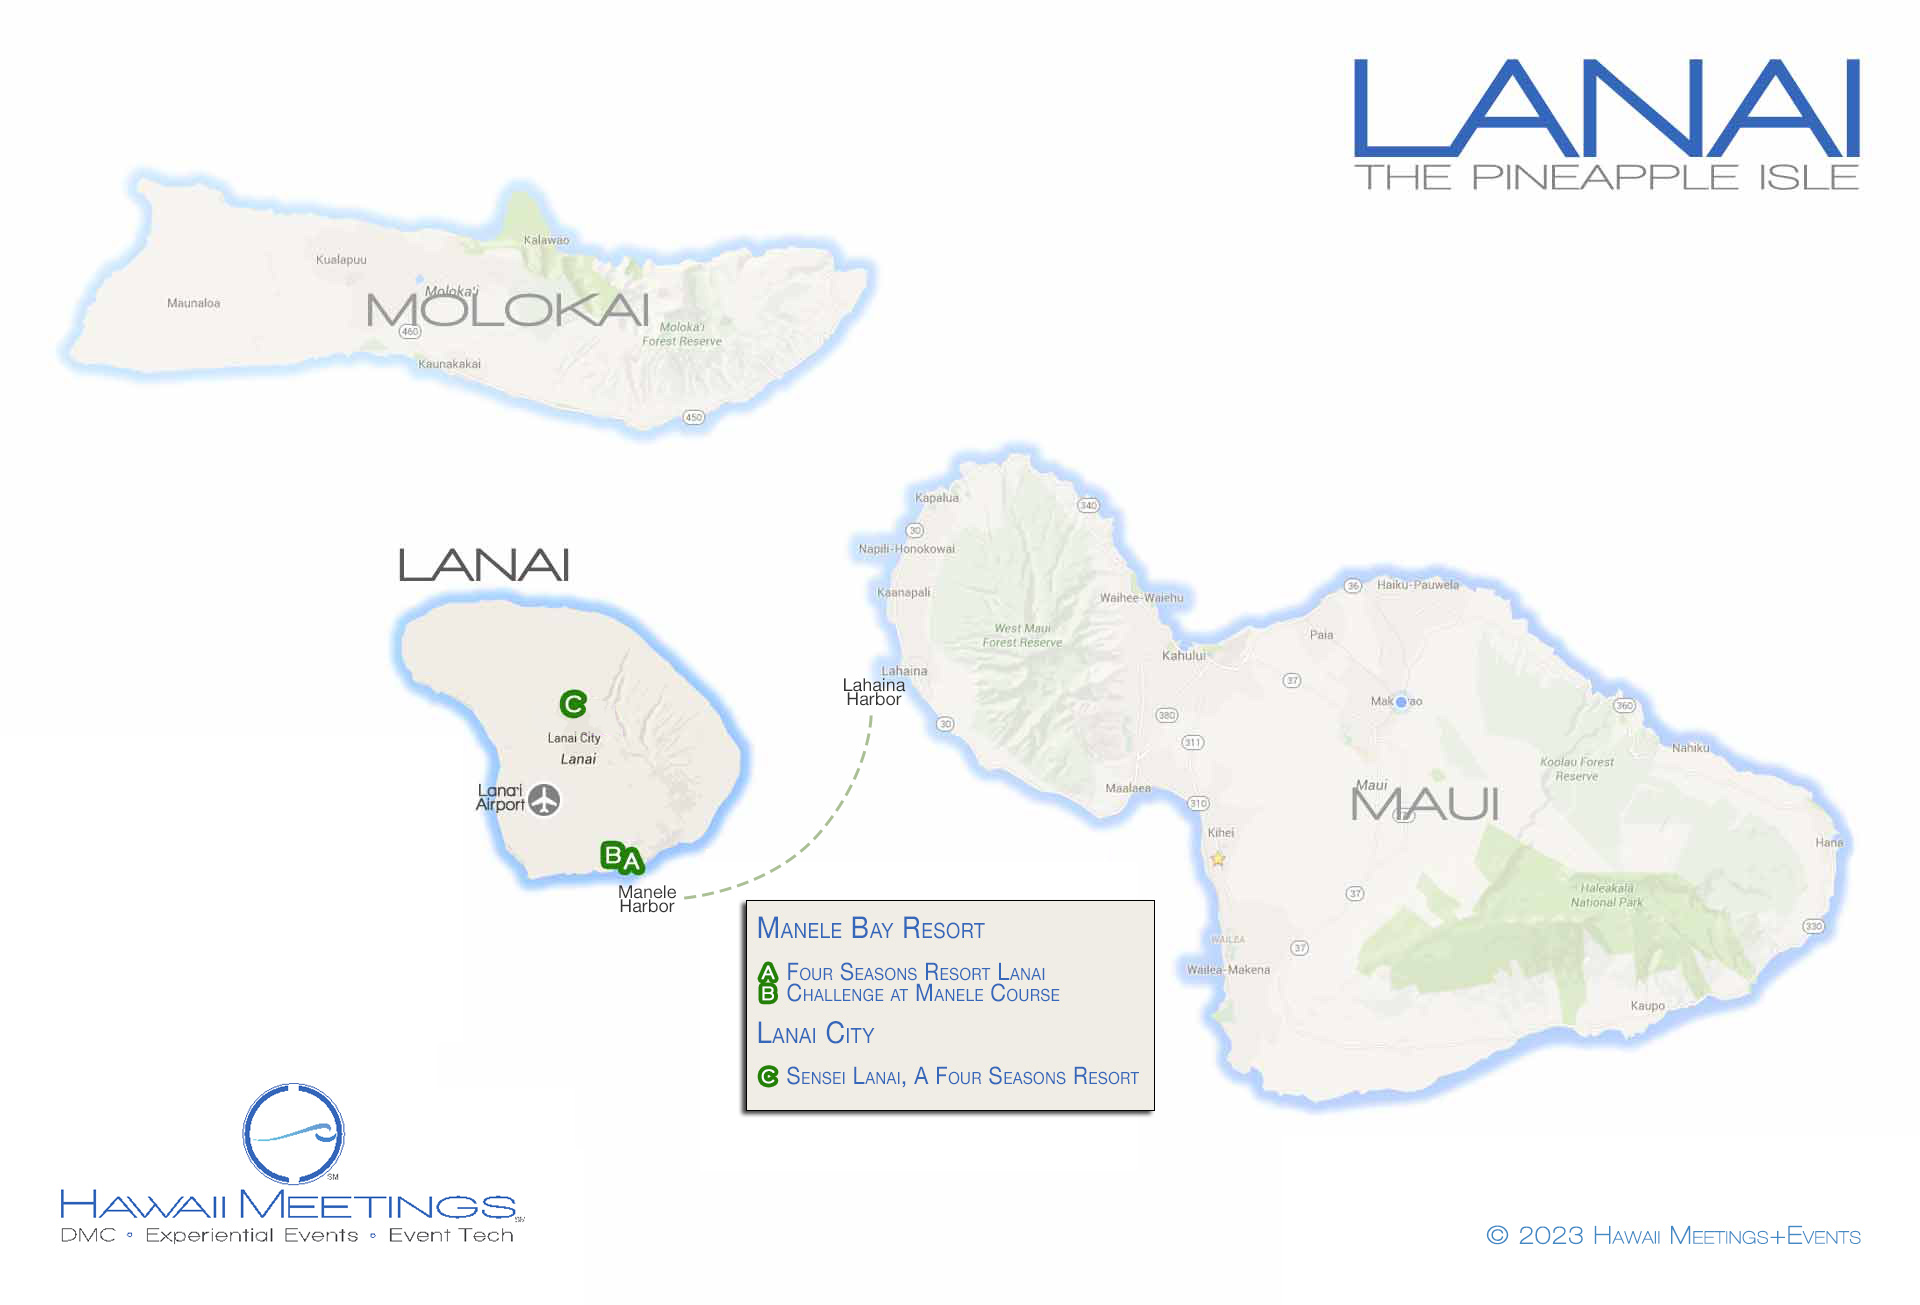 The luxurious meeting and incentive island of Lanai.